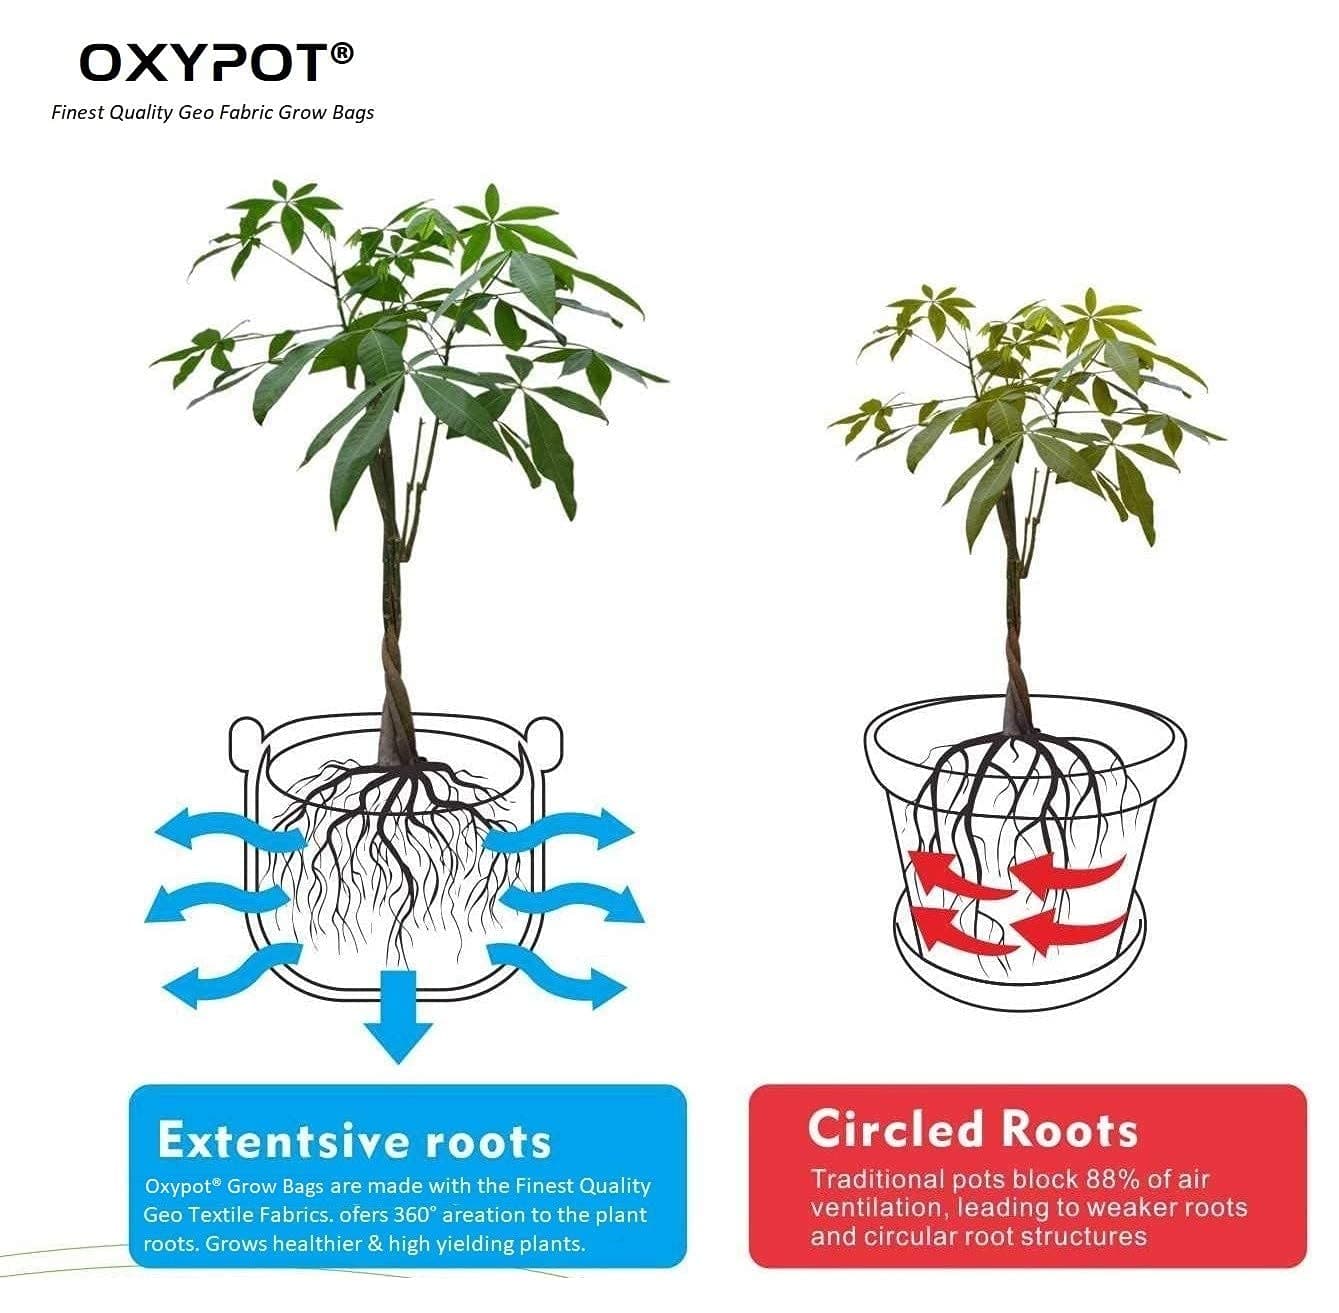 Oxypot Breathable Fabric Grow Bags, 12x12x10 Inches- Pack of 5